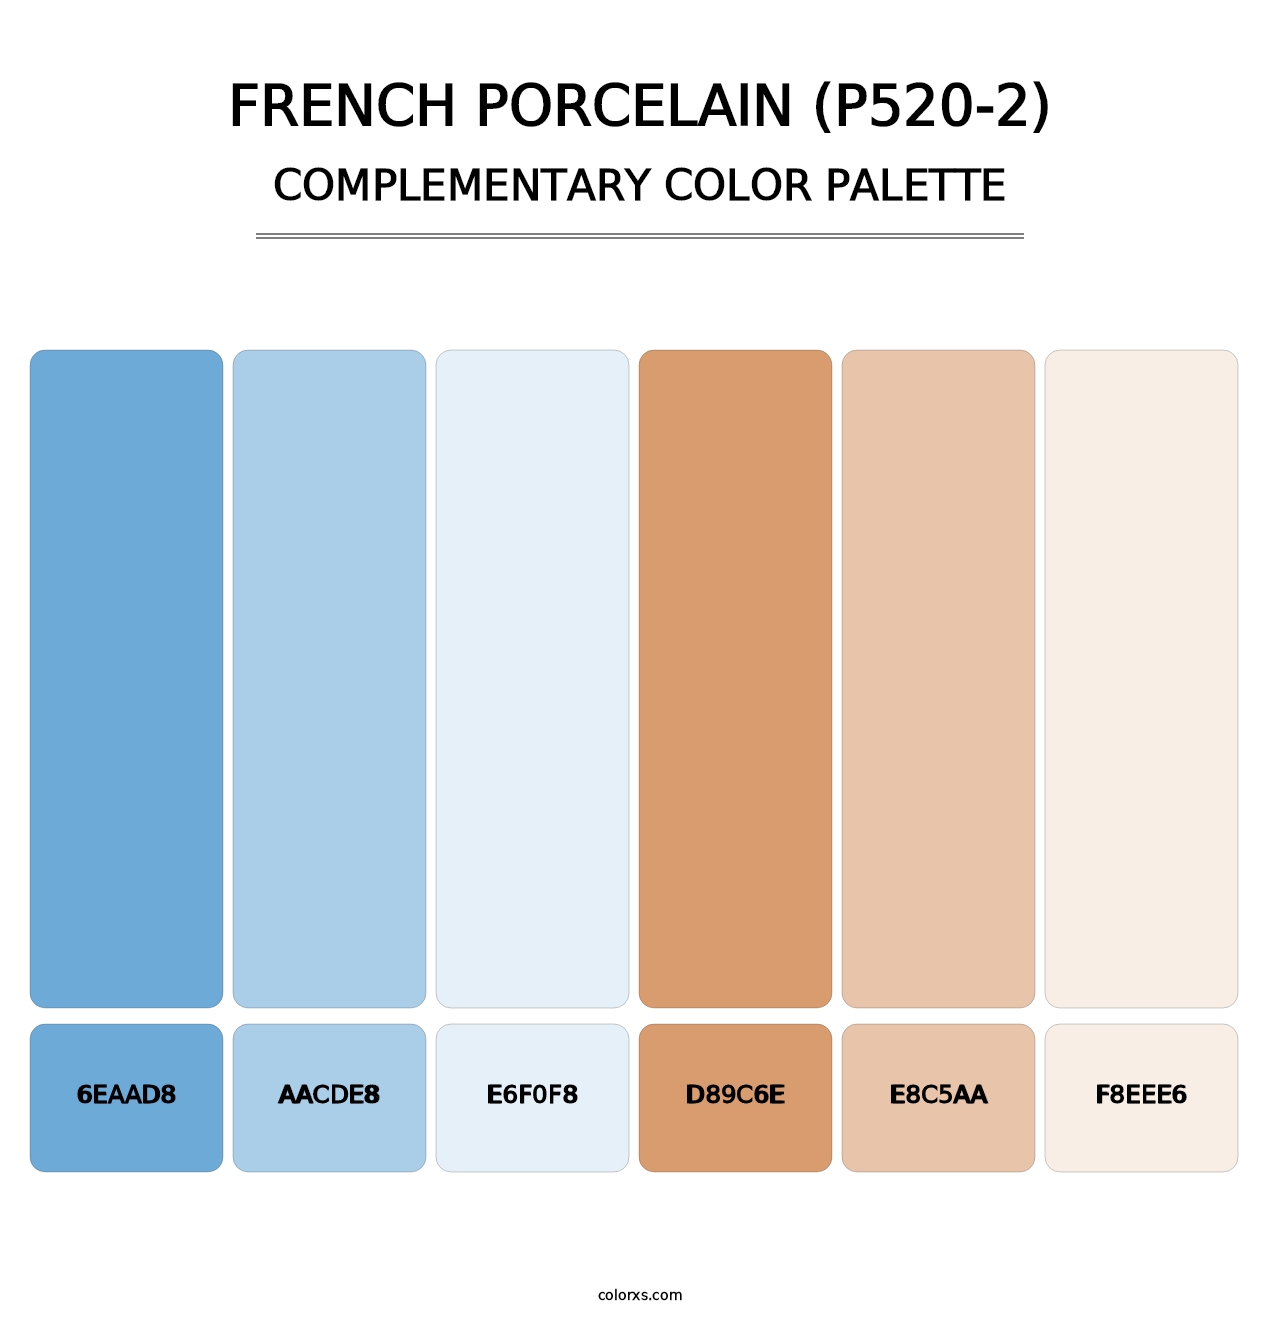 French Porcelain (P520-2) - Complementary Color Palette